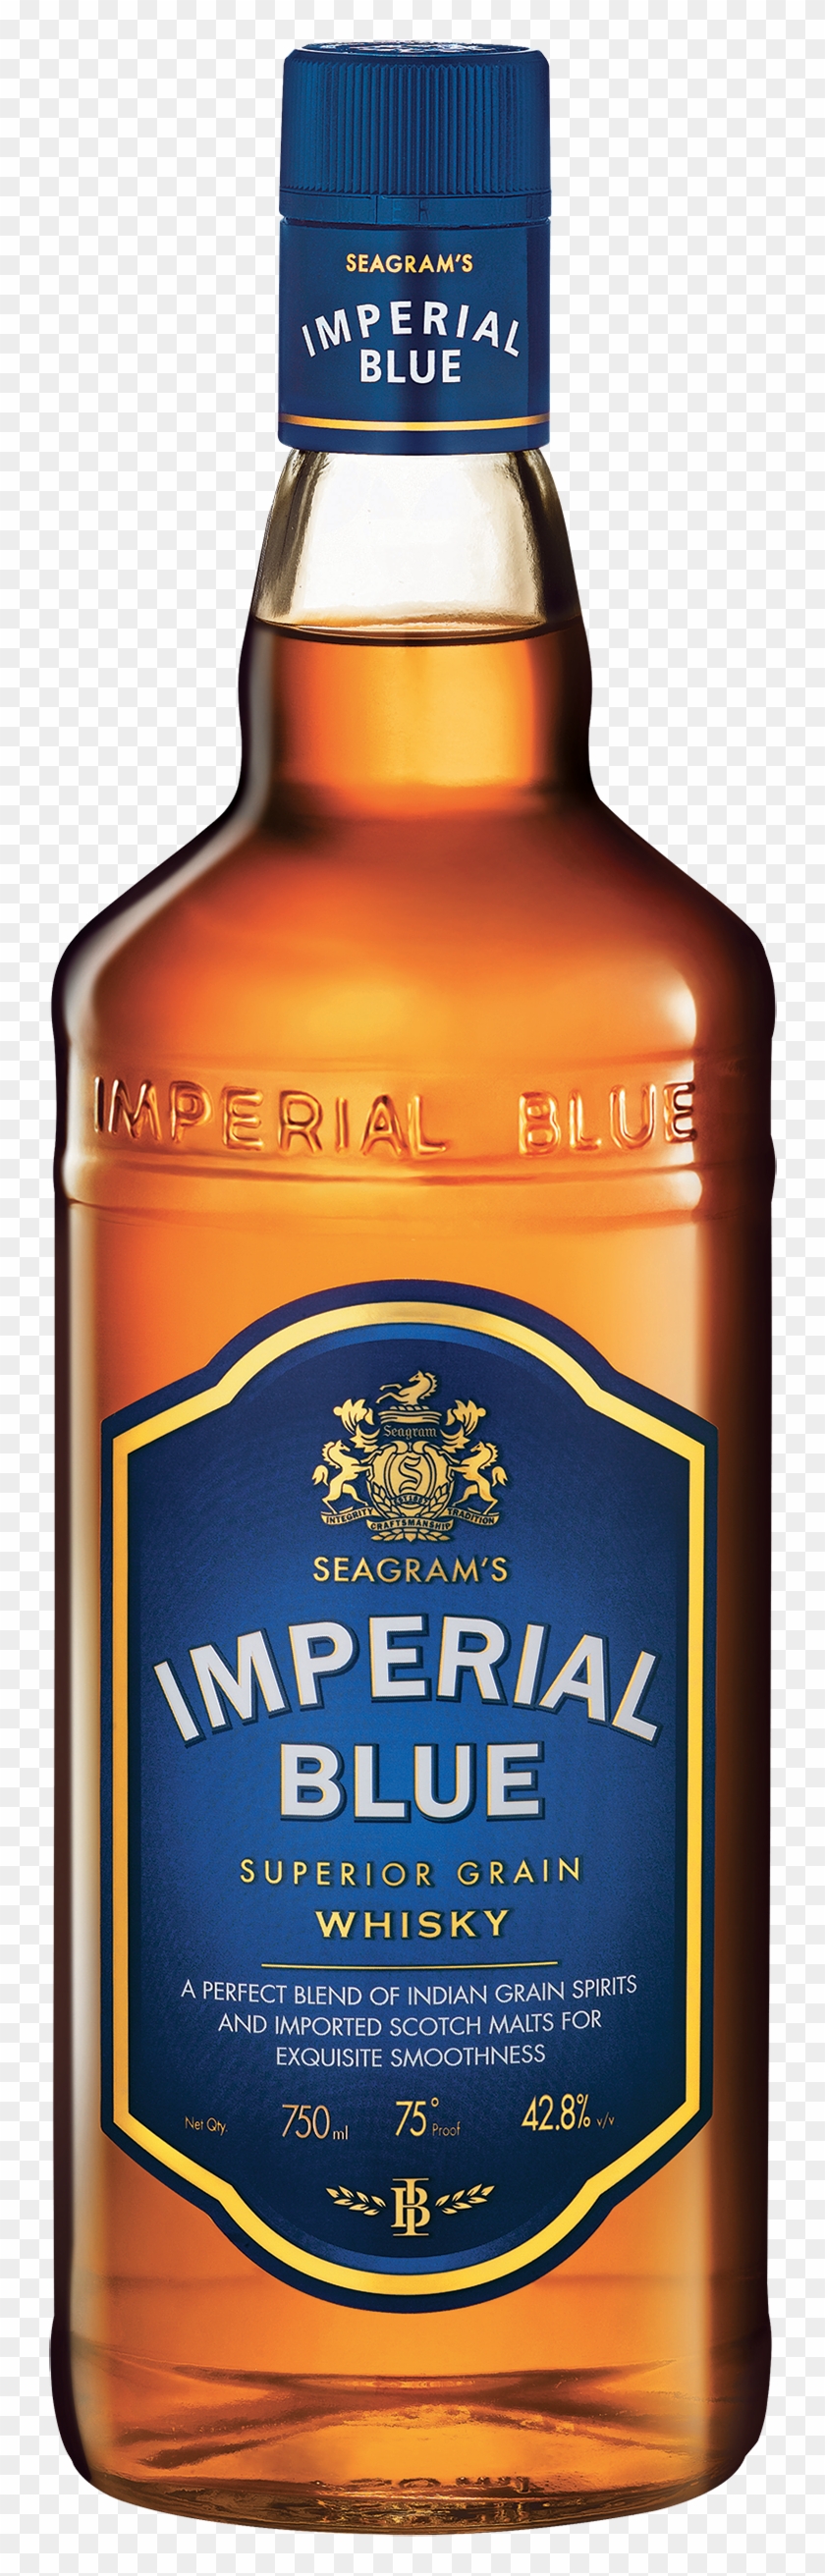 Packshot Imperial Blue Imperial Blue 180ml Price Hd Png Download 759x2560 4010129 Pngfind